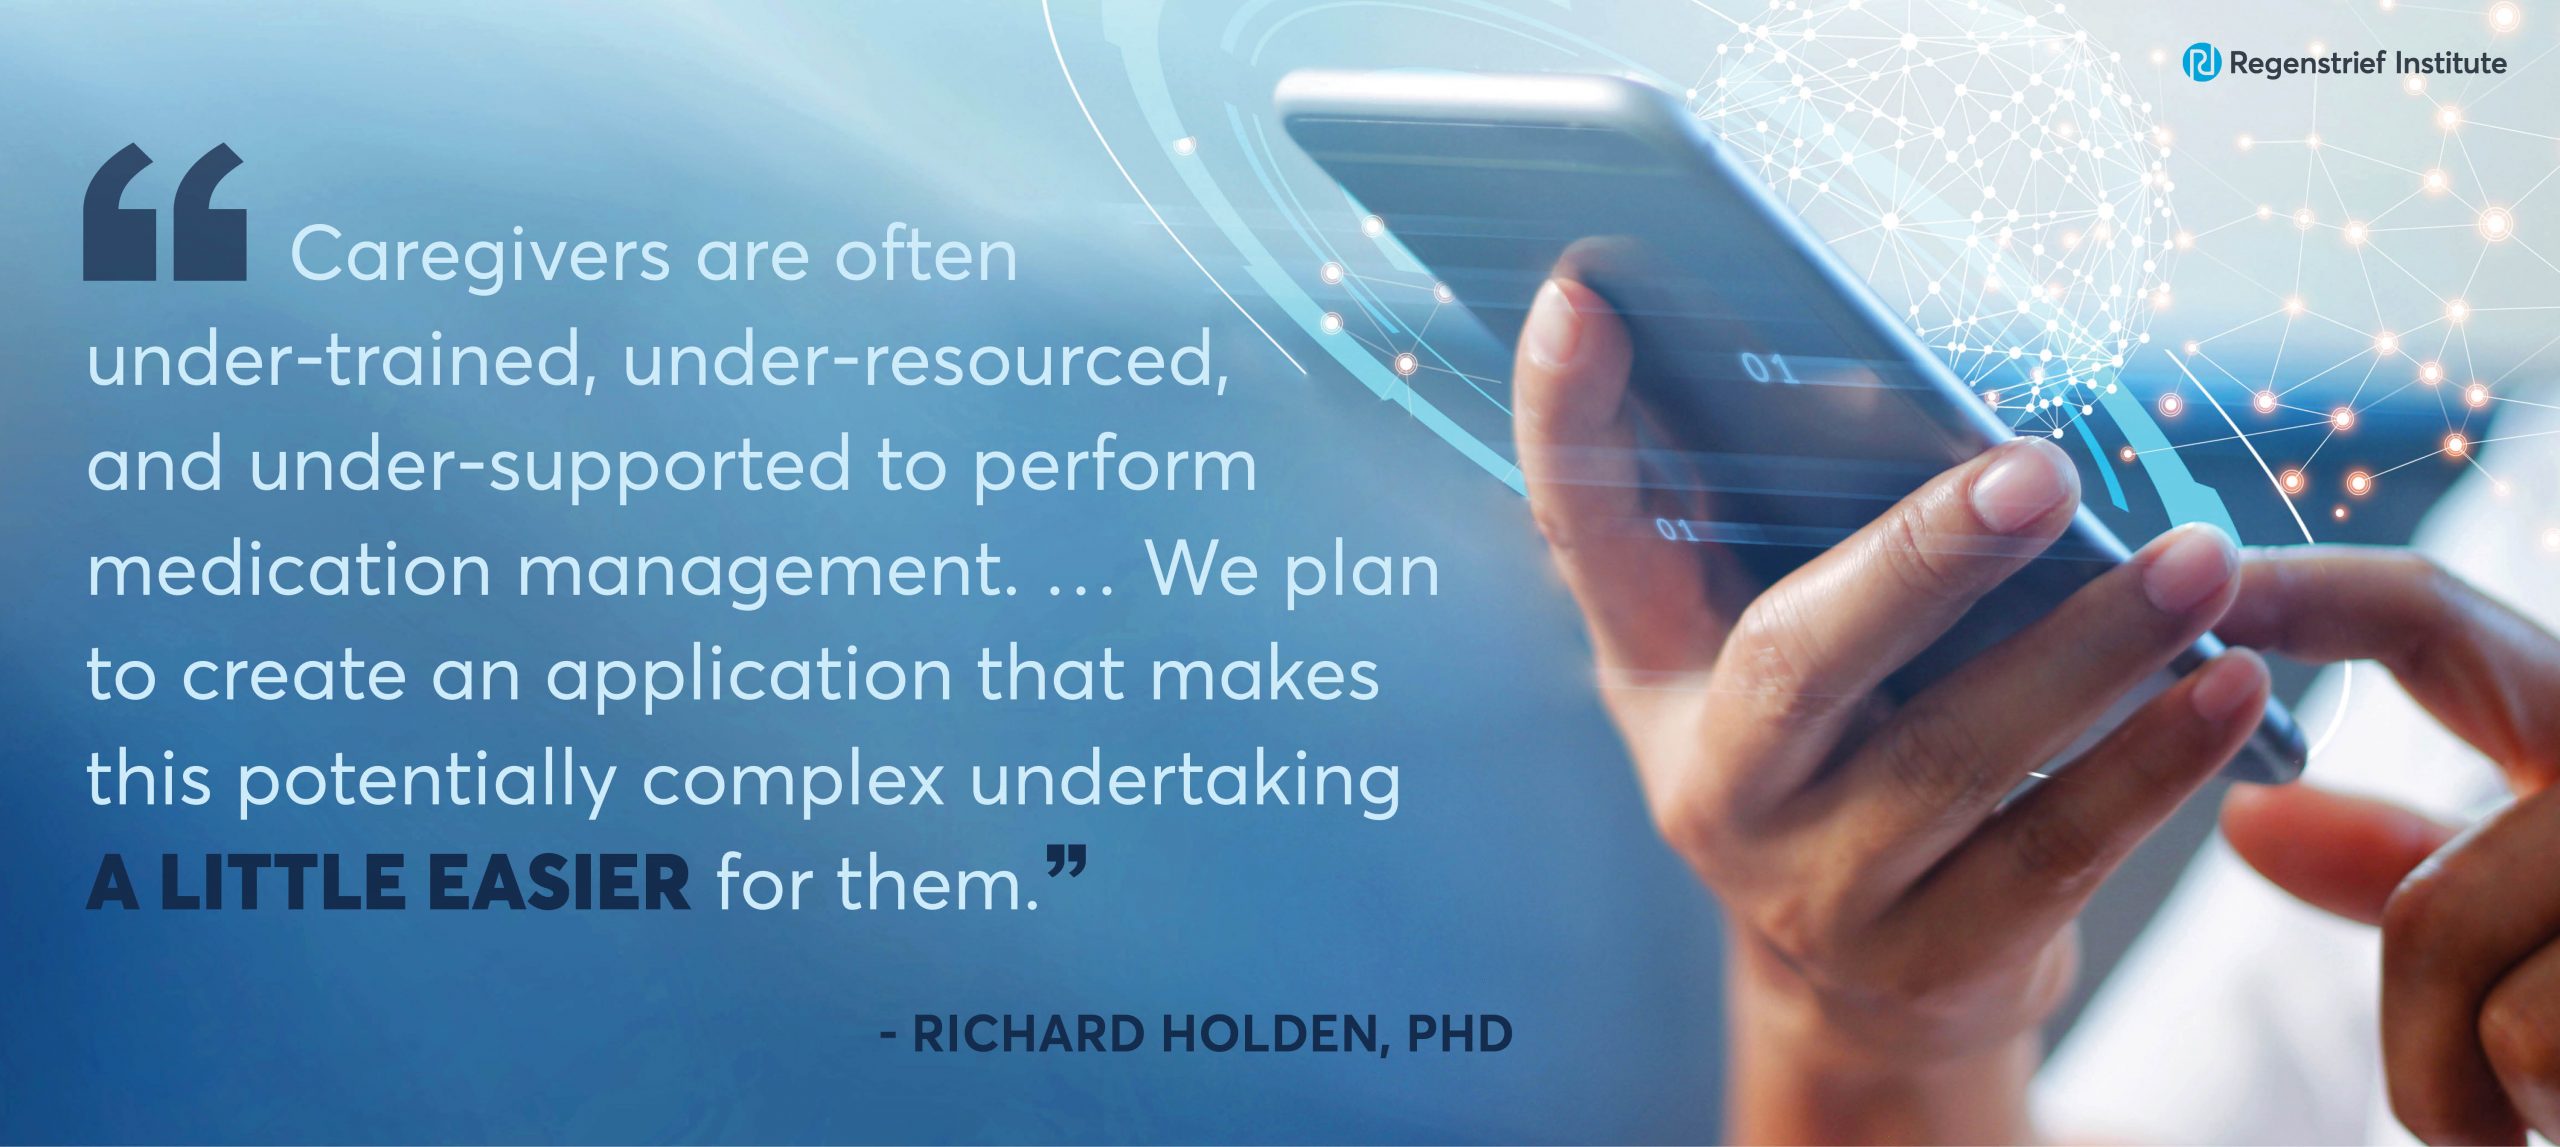 Dr. Richard Holden quote: Caregivers are often under-trained, under-resourced, and undersupported to perform medication management... We plan to create an application that makes this potentially complex undertaking a little easier for them"